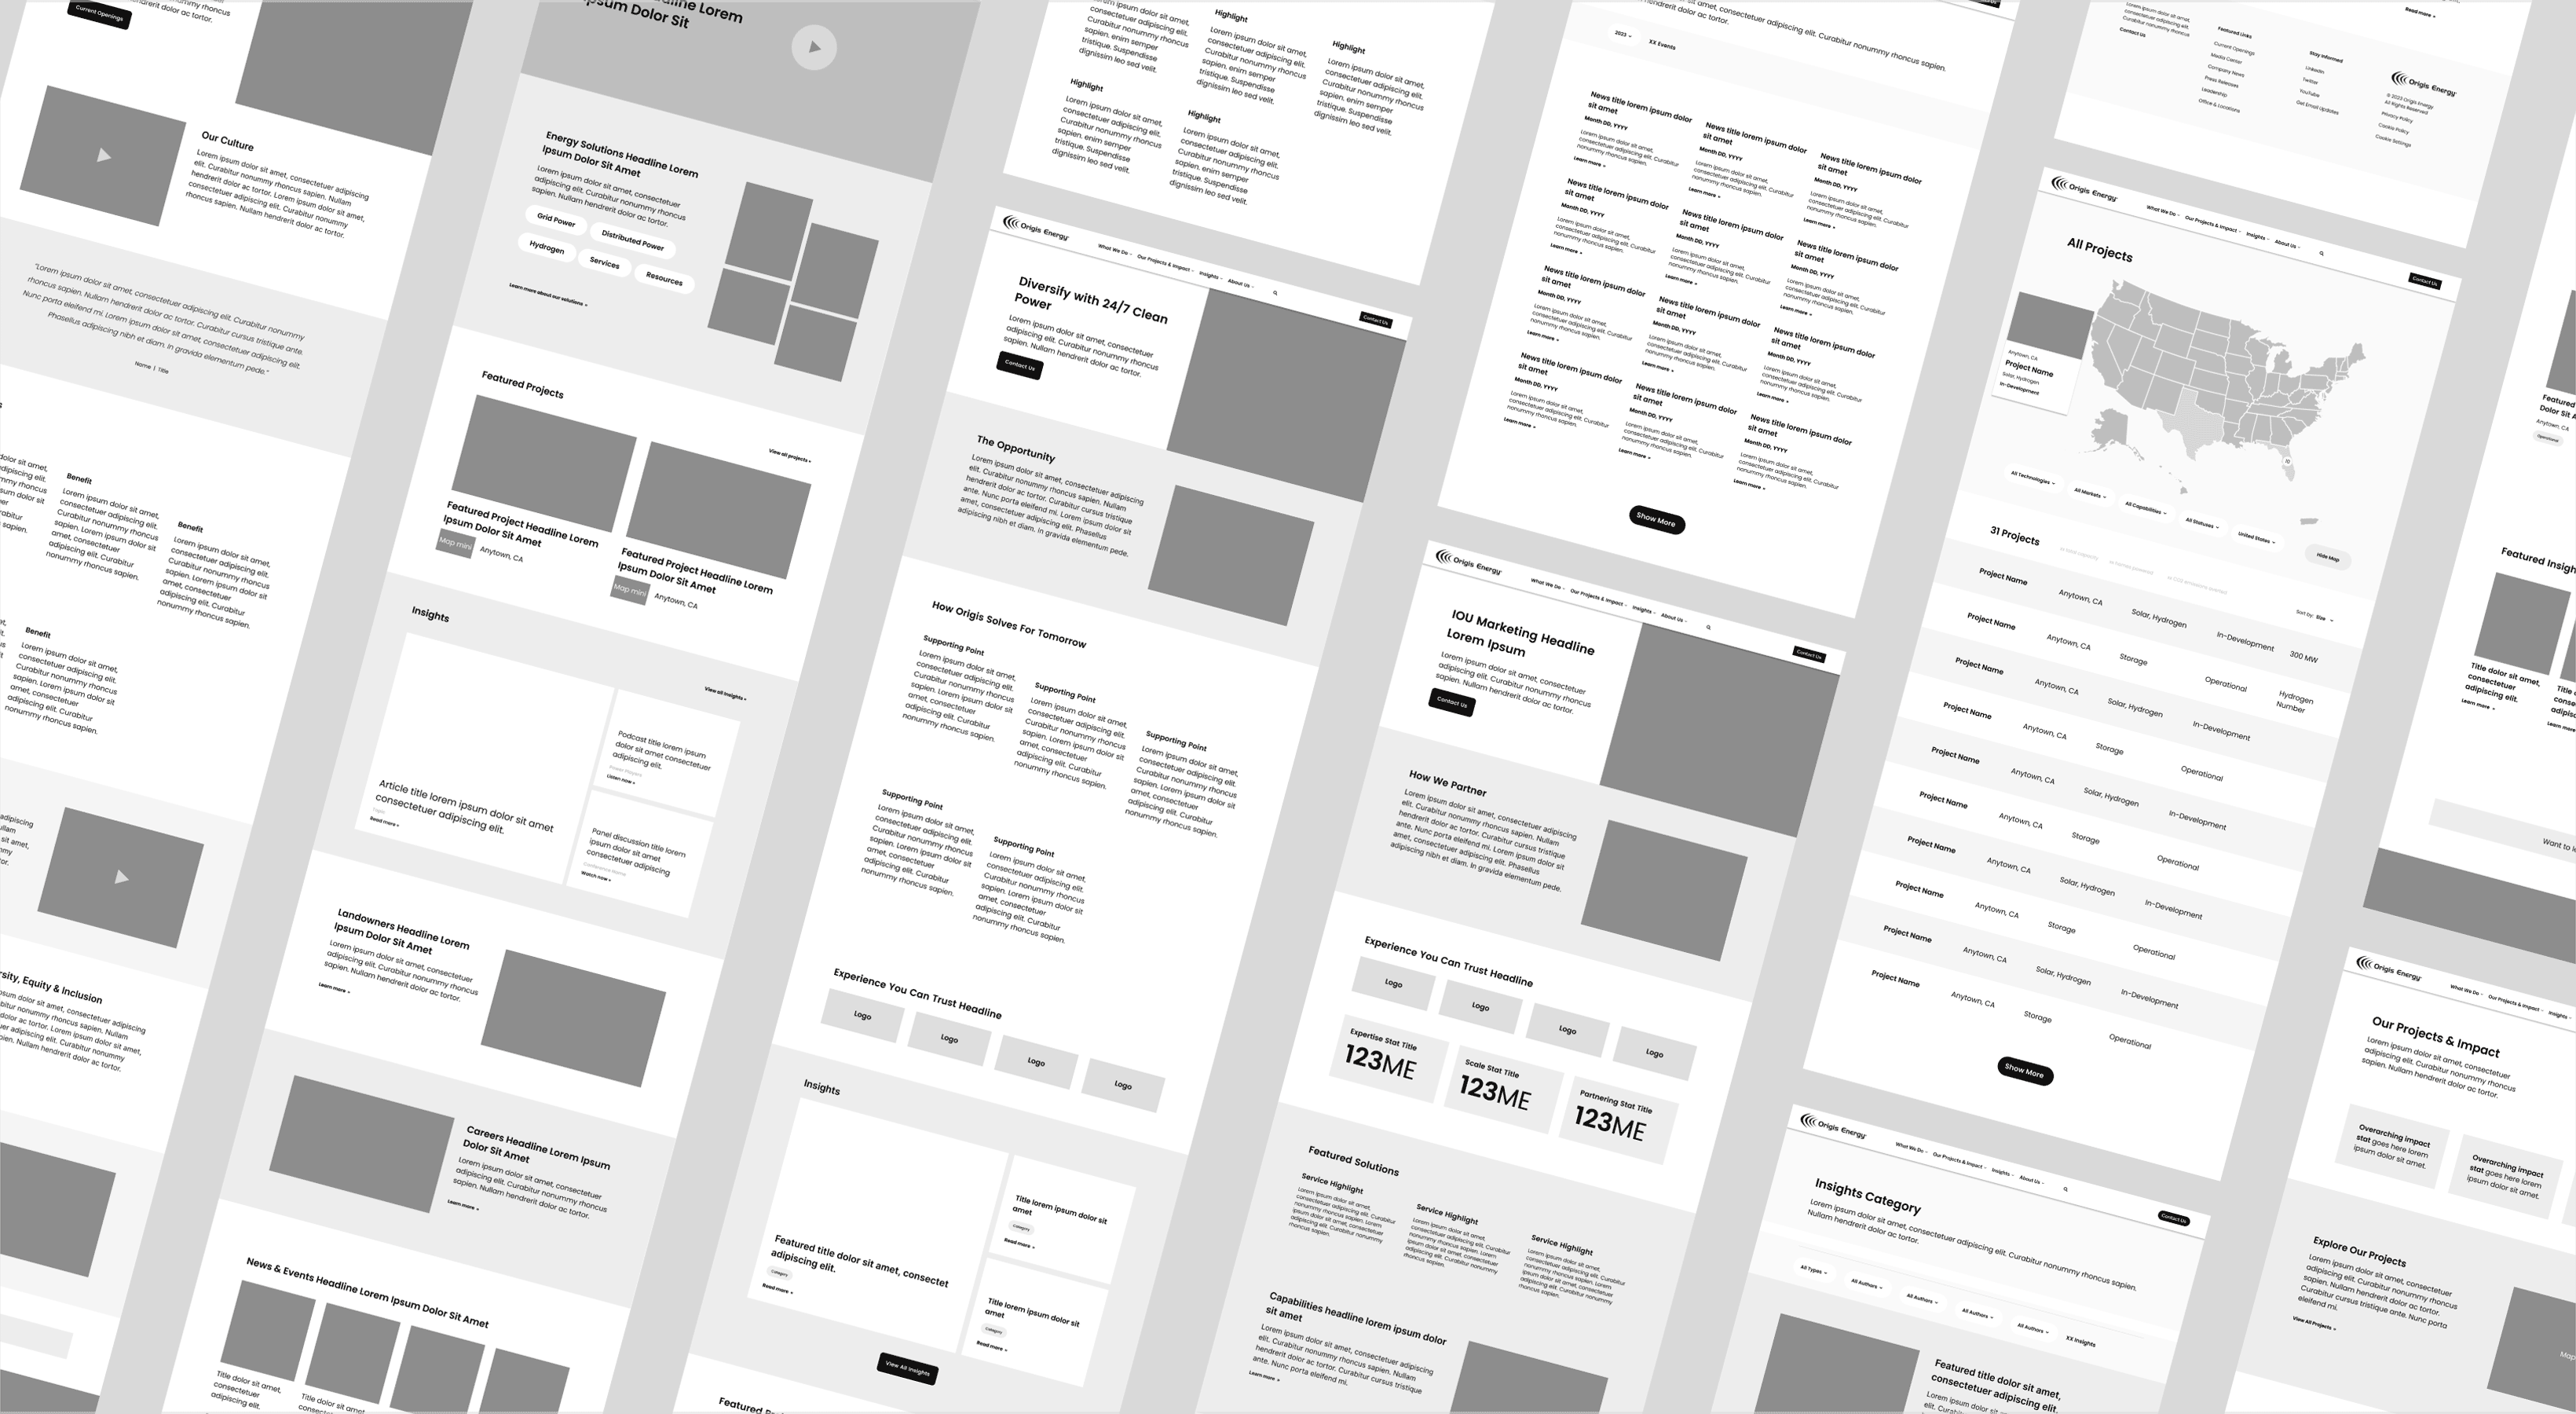 UX and design standards for the Origis Company Website